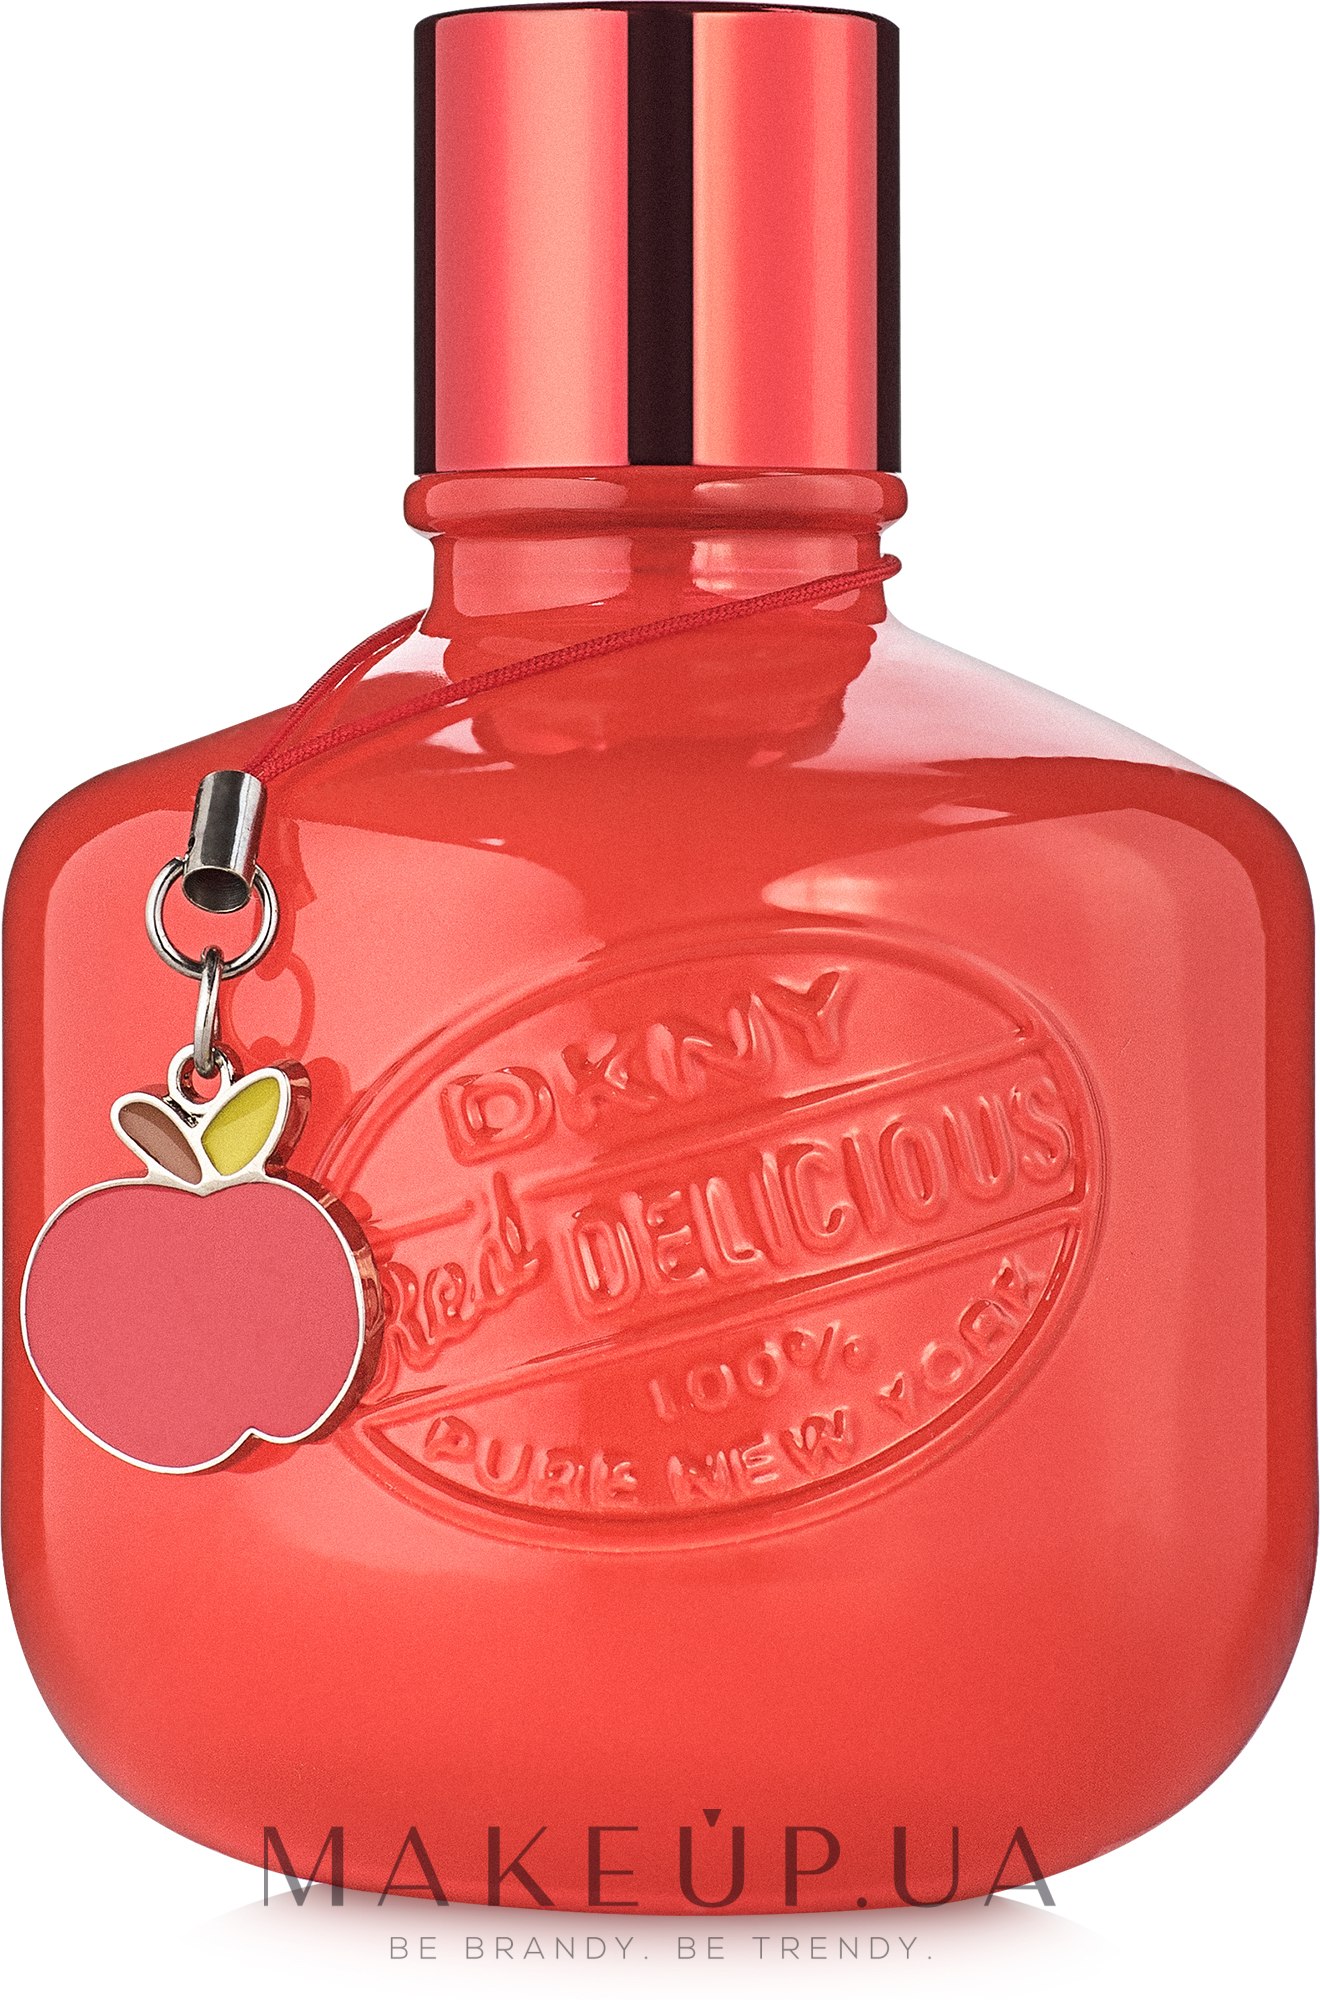 DKNY Red Delicious Charmingly Delicious - Туалетная вода — фото 125ml